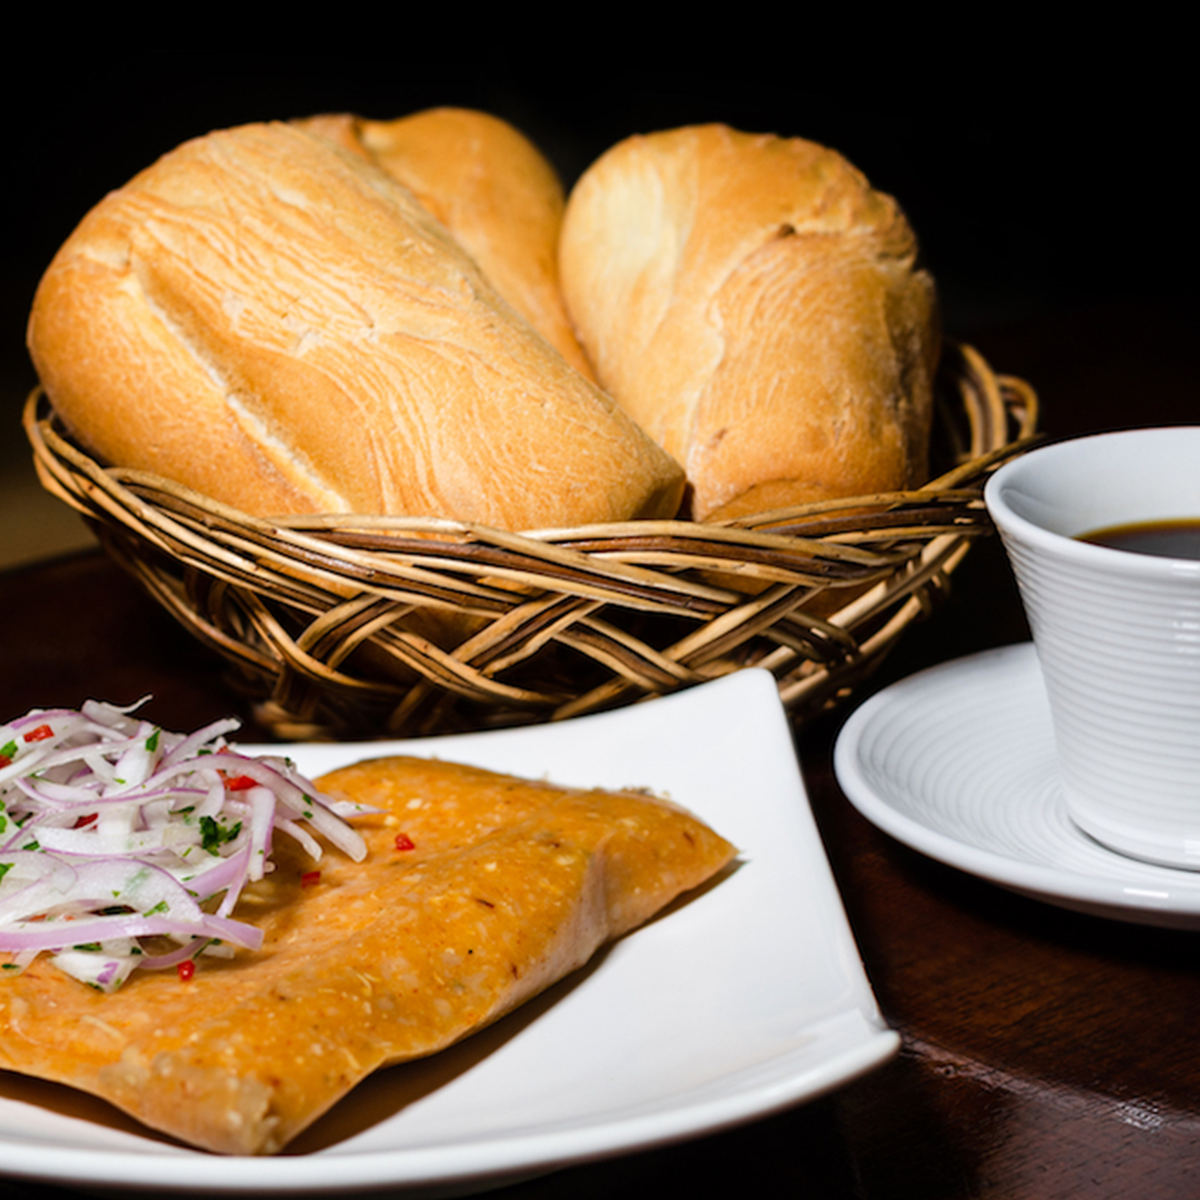 A popular Peruvian breakfast: a tamale served with salsa Criolla (pickled onions) on a square plate. Adjacent is a cup of coffee and a basket full of bread rolls. Photo Credit: ID 209102501 © Juan José Napuri Guevara | Dreamstime.com